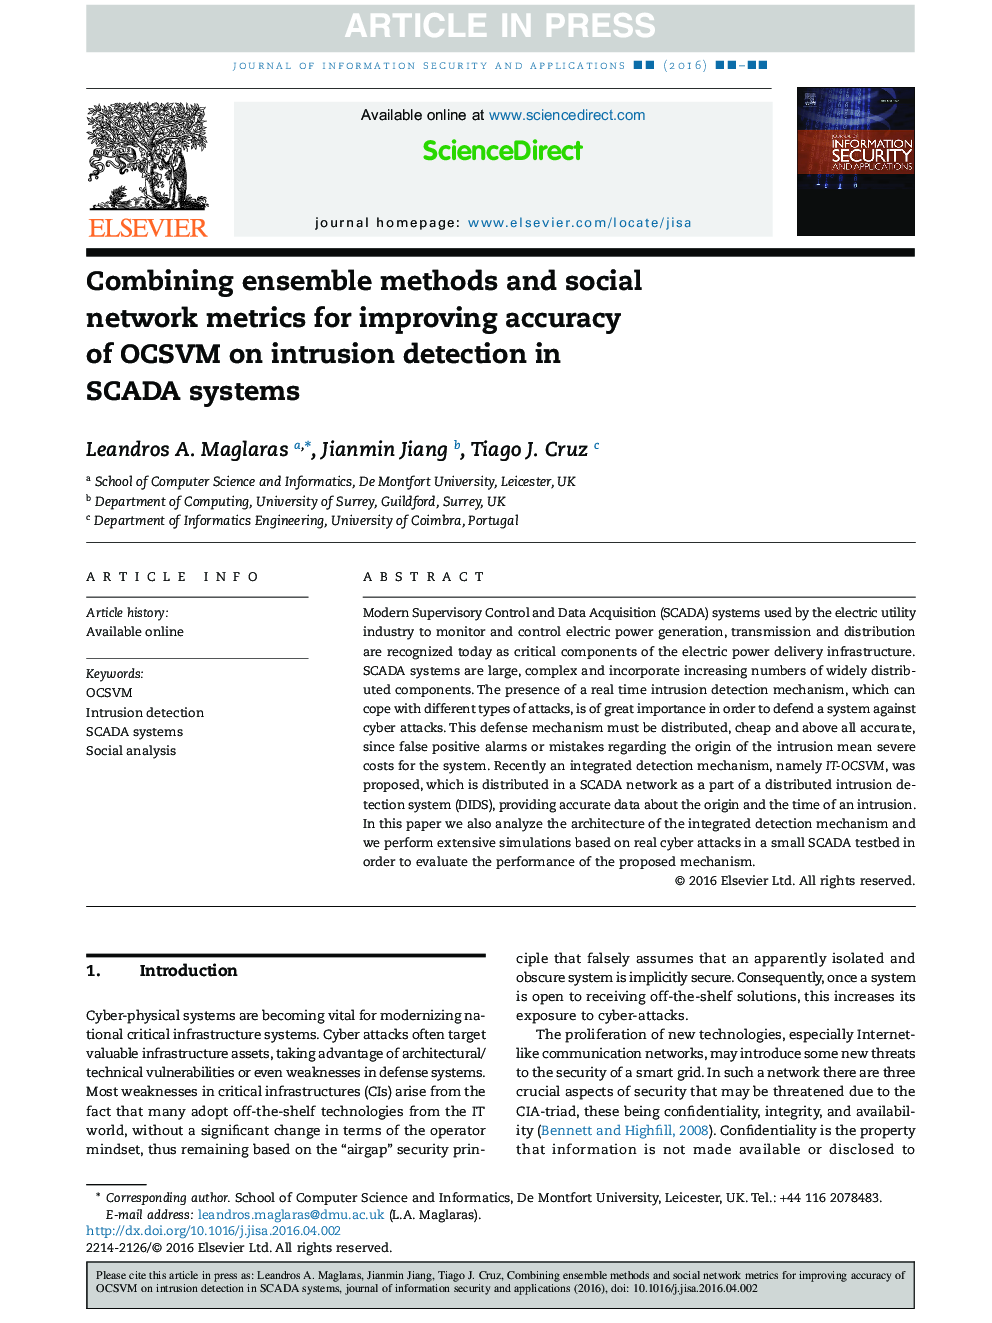 Combining ensemble methods and social network metrics for improving accuracy of OCSVM on intrusion detection in SCADA systems